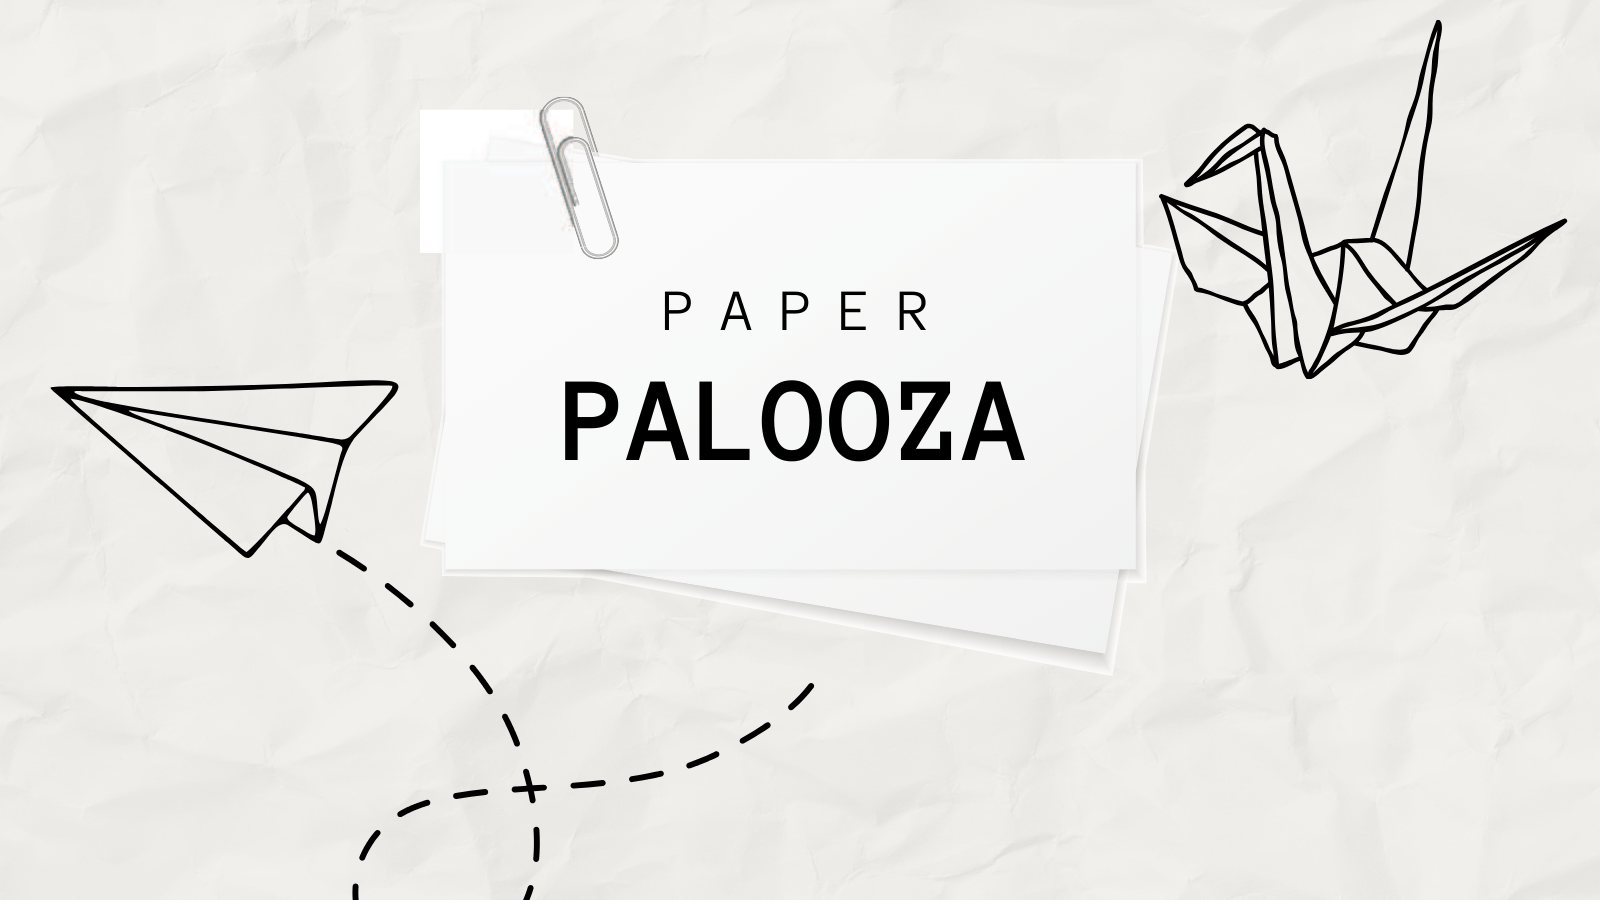 "Paper Palooza" along with an origami crane and a paper airplane